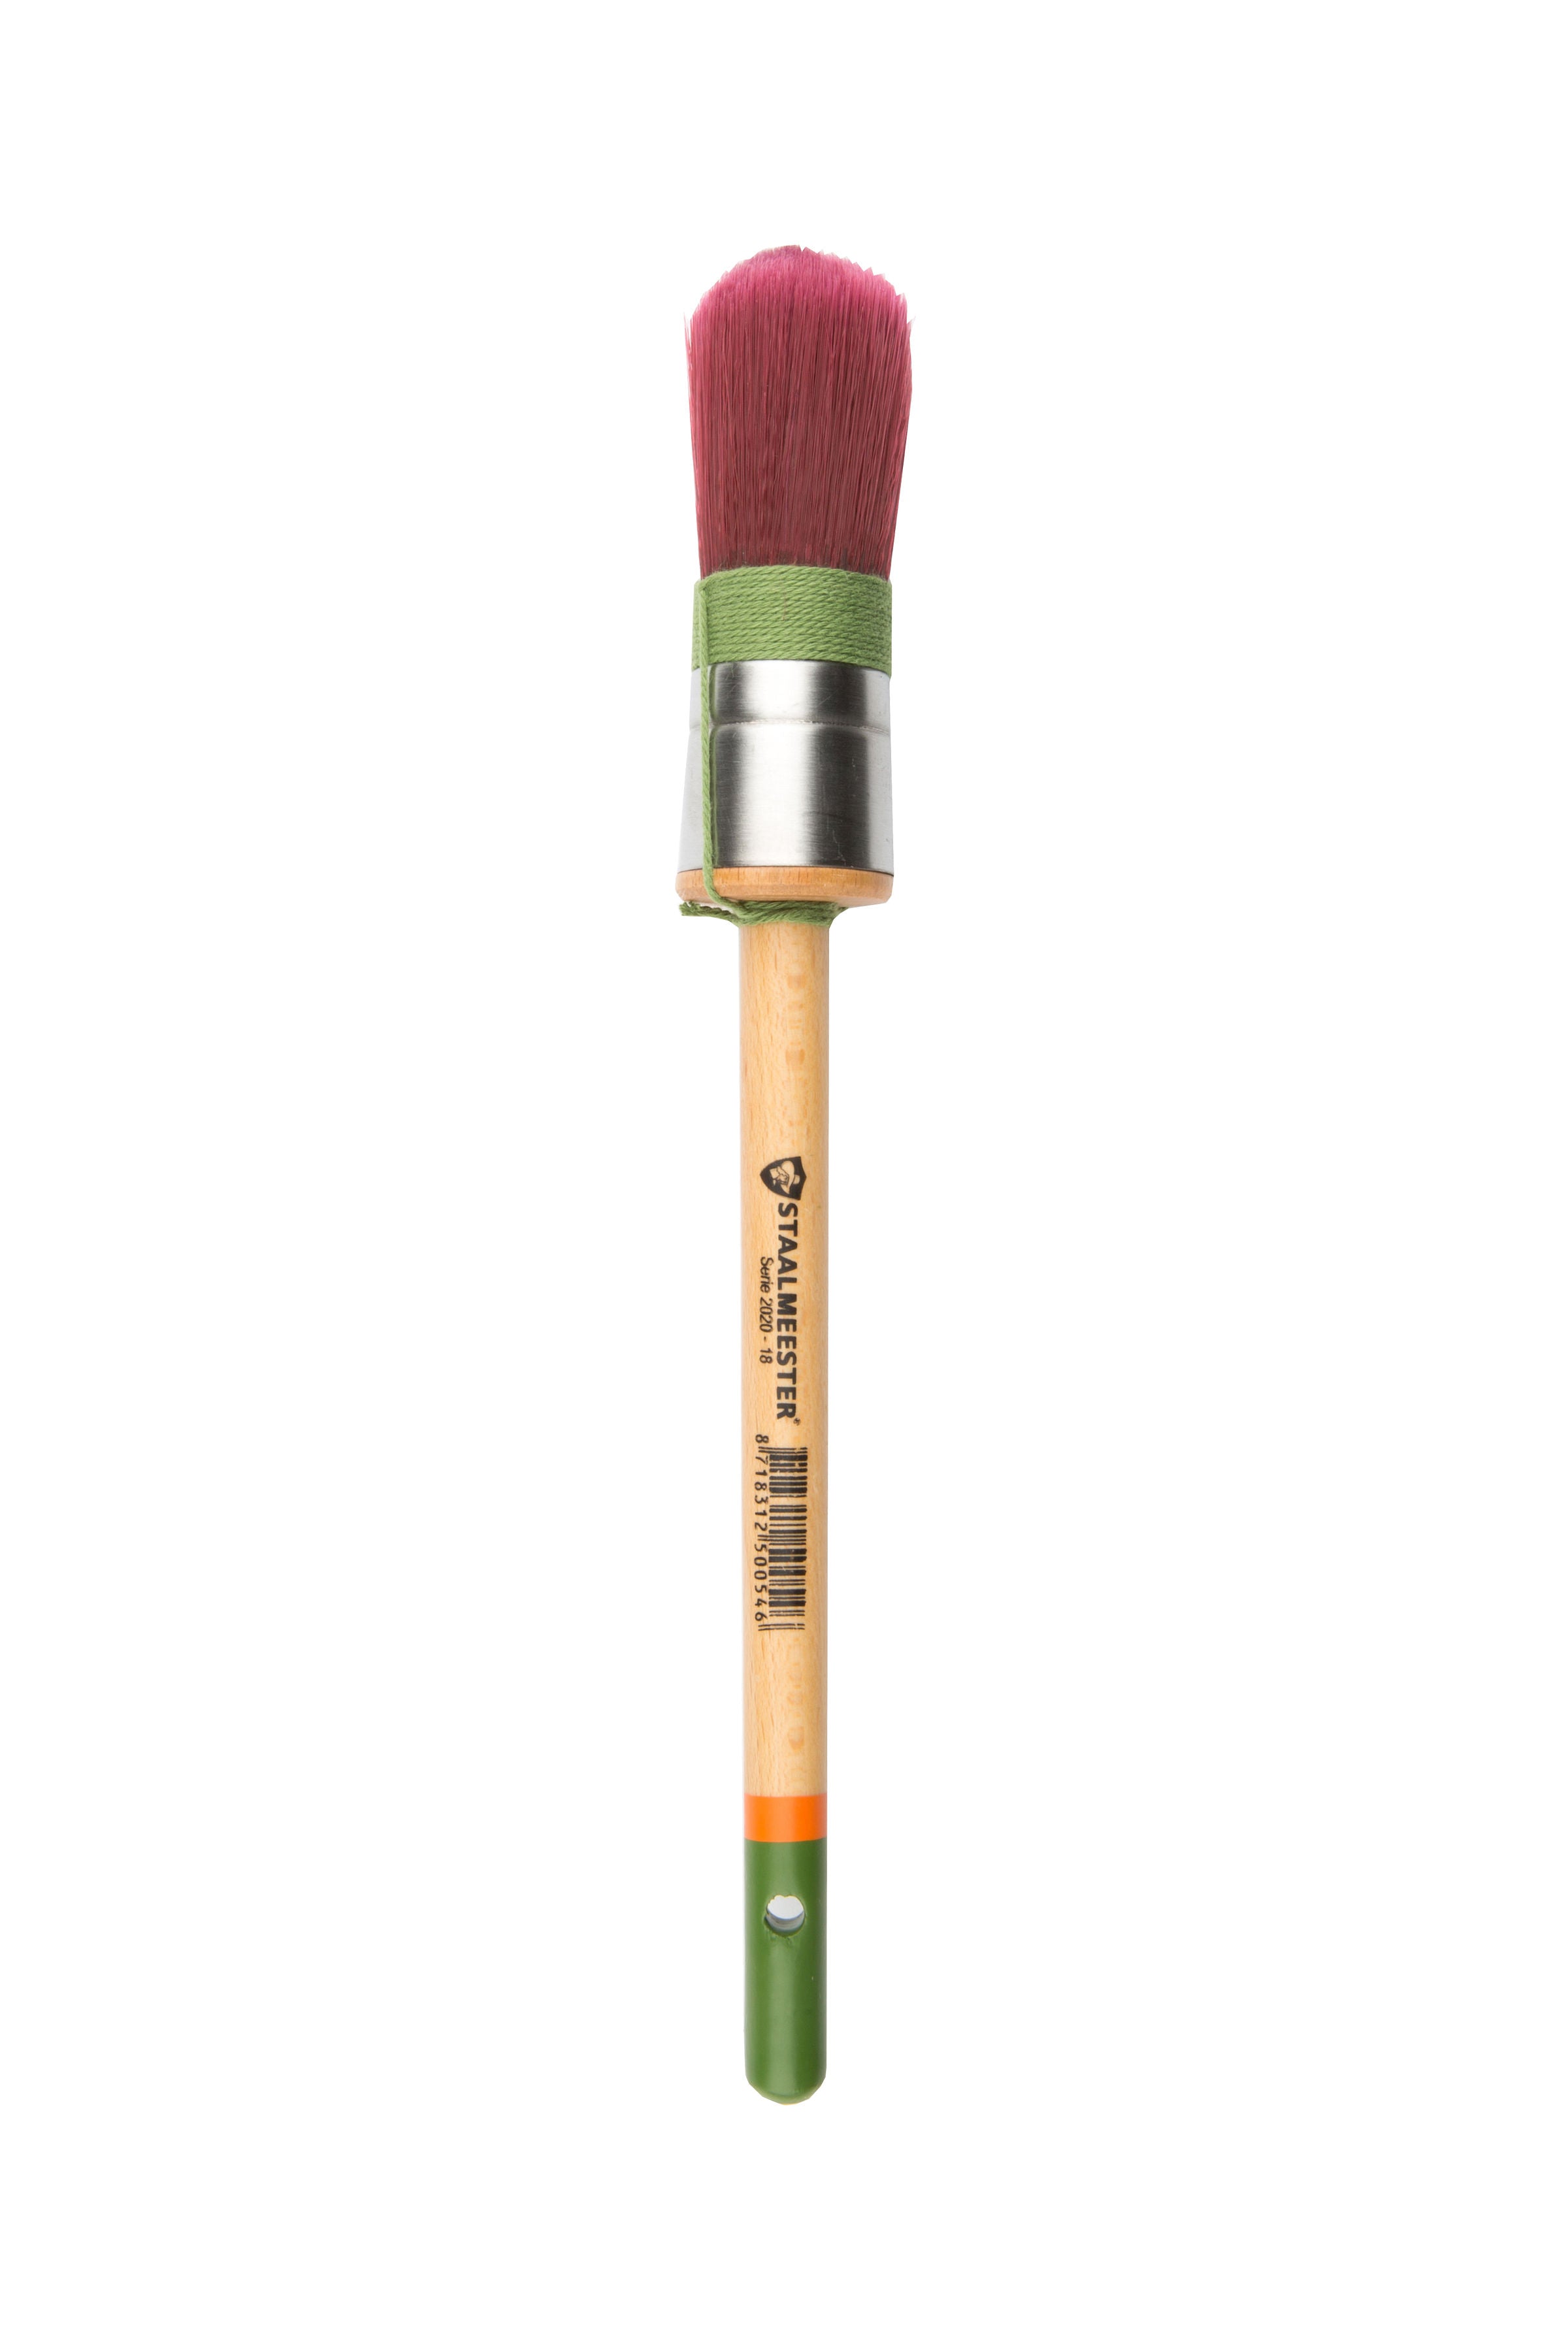 Staalmeester Pro-Hybrid Round Synthetic Brush #18